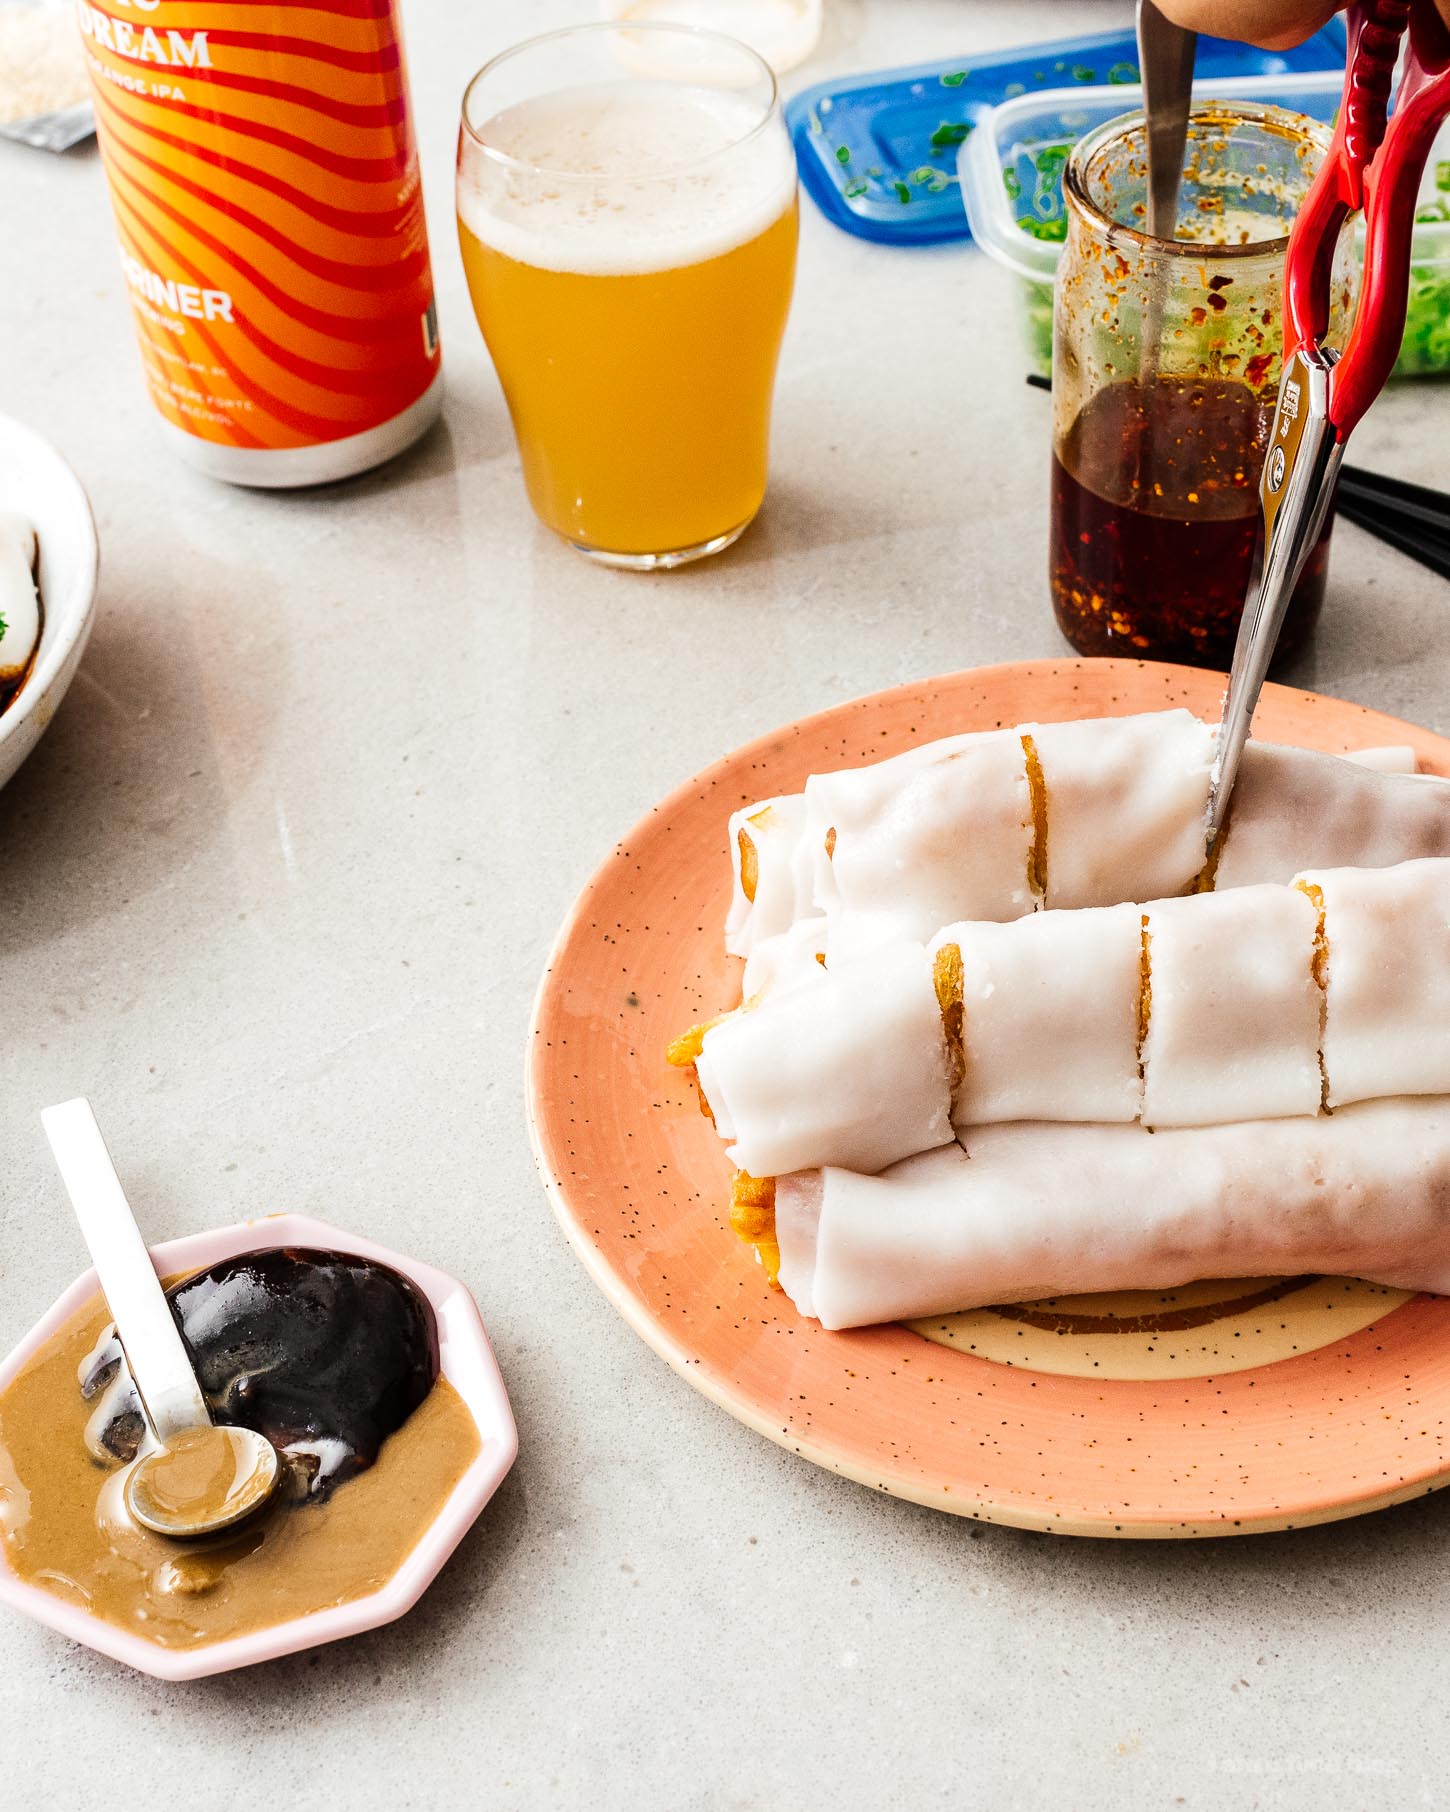 Zhaliang is super popular dish at Cantonese style dim sum made cheung fun (rice noodle sheets) wrapped around crispy youtiao (Chinese fried dough). It’s insanely tasty and easier than you think to make at home! #chinesefood #recipe #dimsum #zhaliang